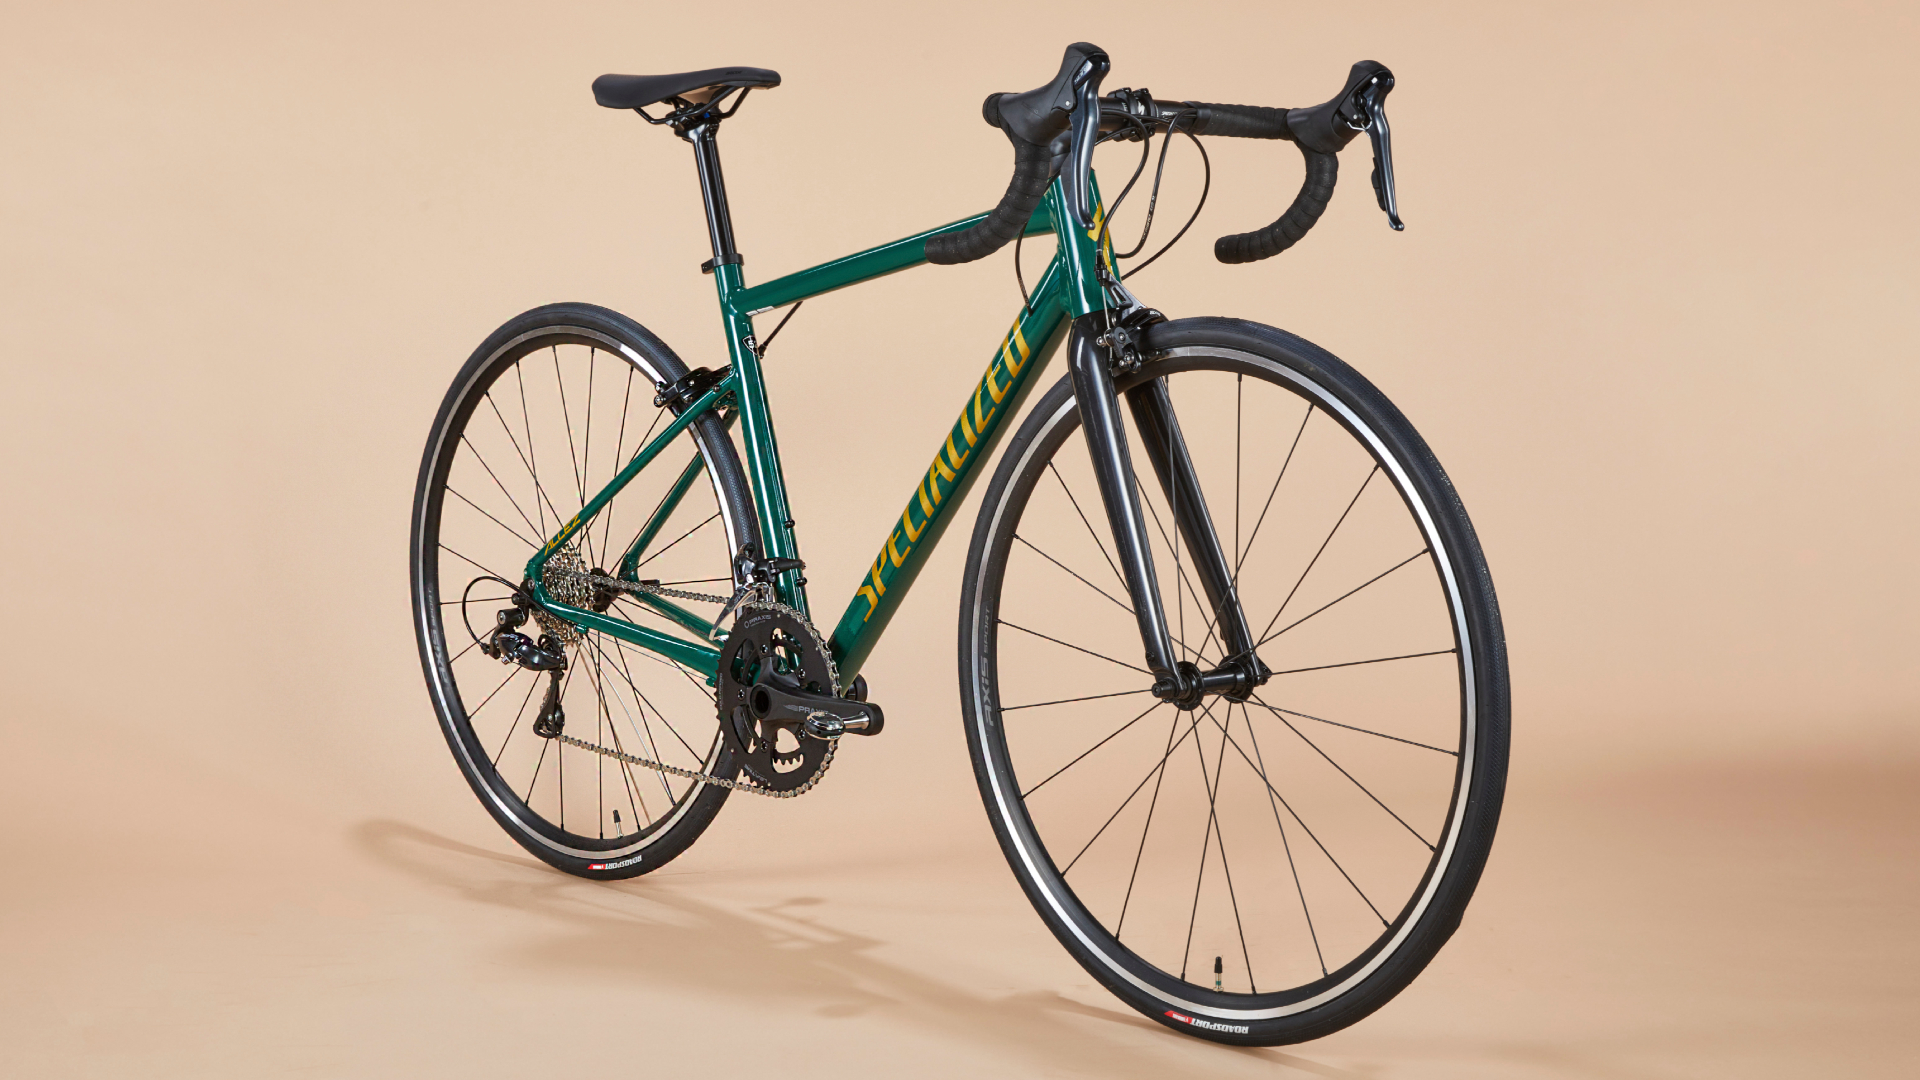 Specialized Allez Sport review - it's been popular for years for a